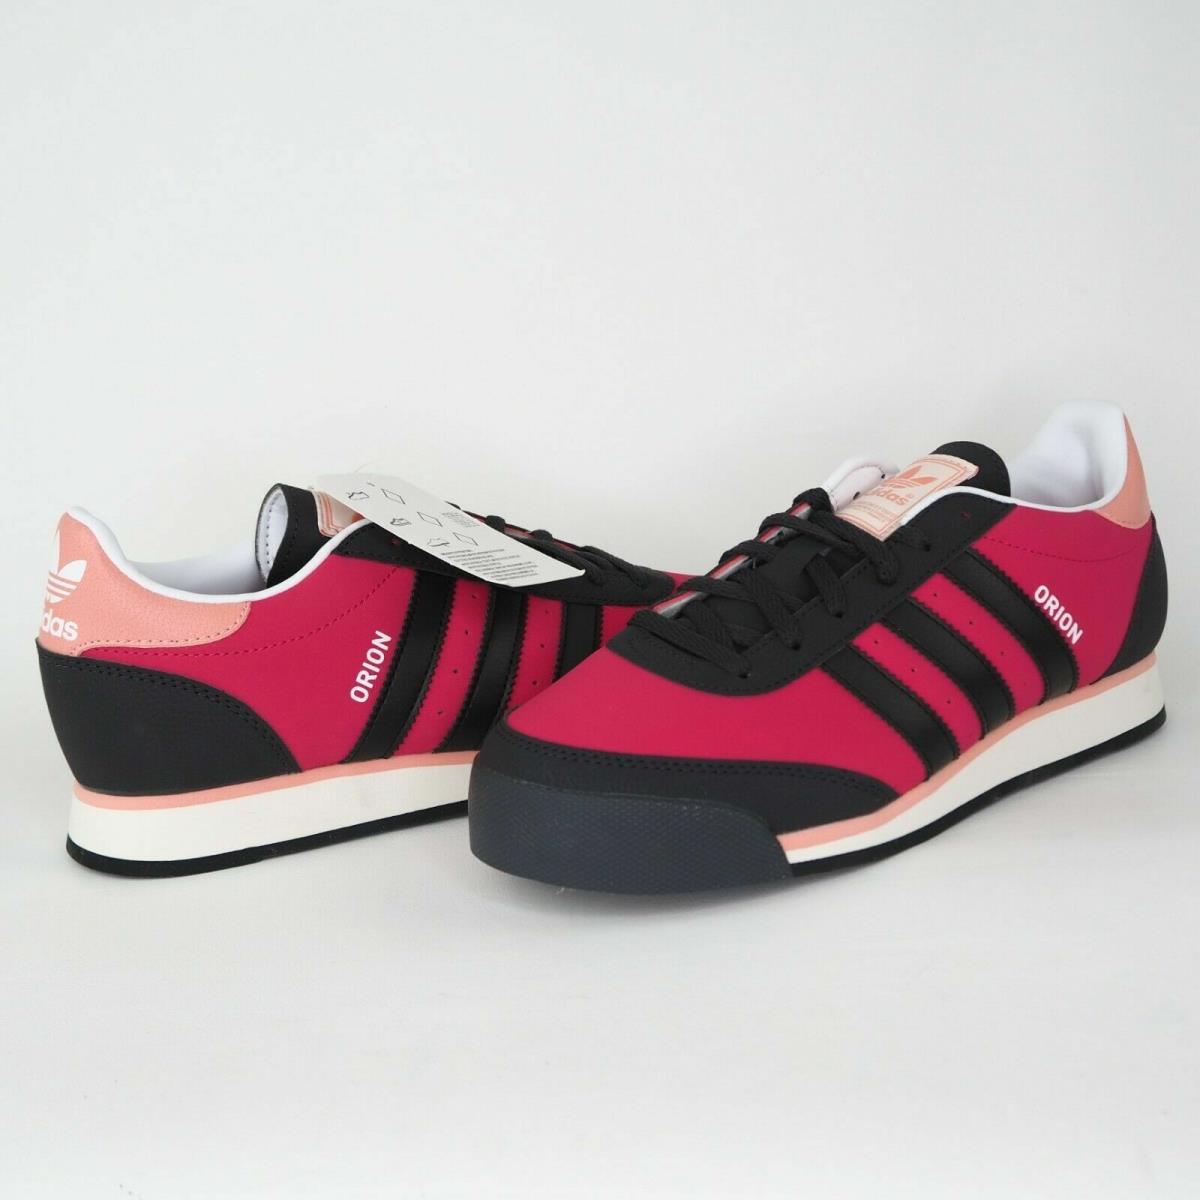 Adidas shoes Orion - Pink 8